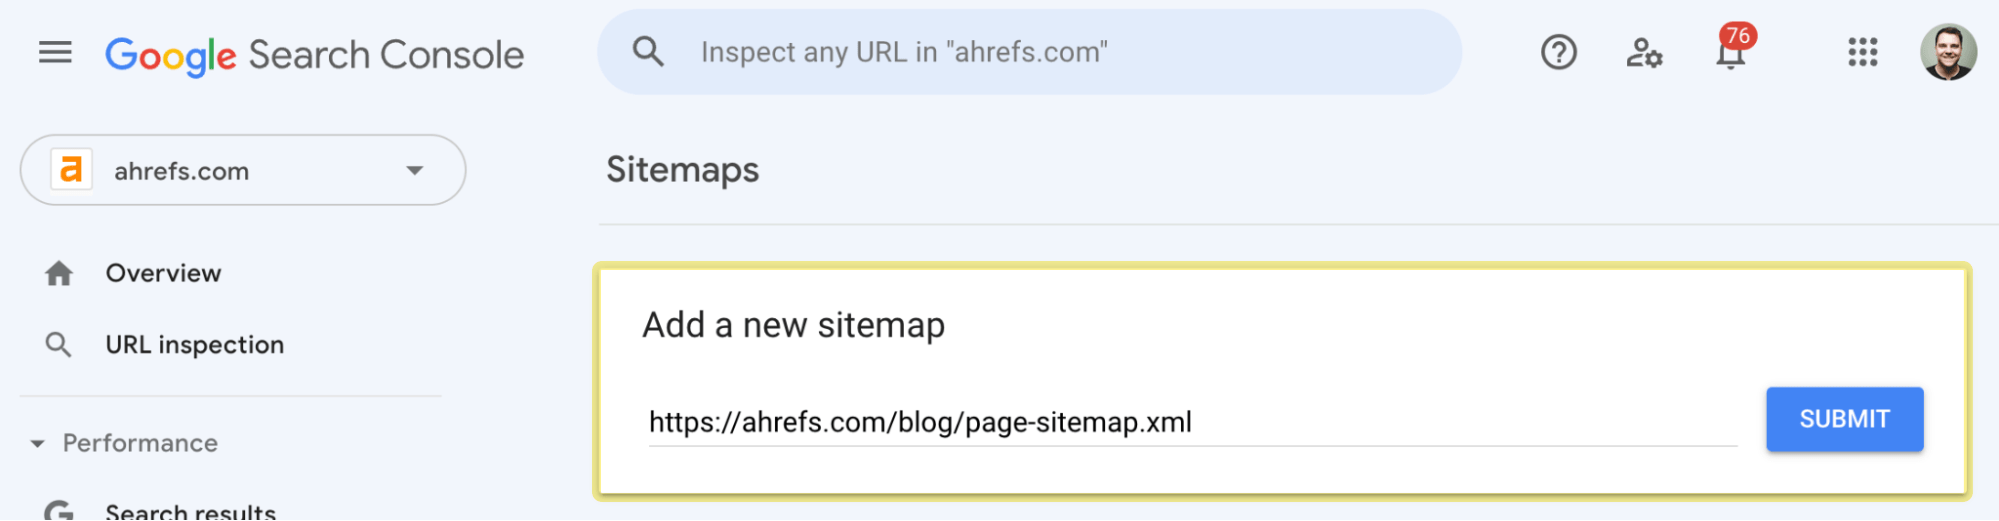 How to submit your sitemap to Google